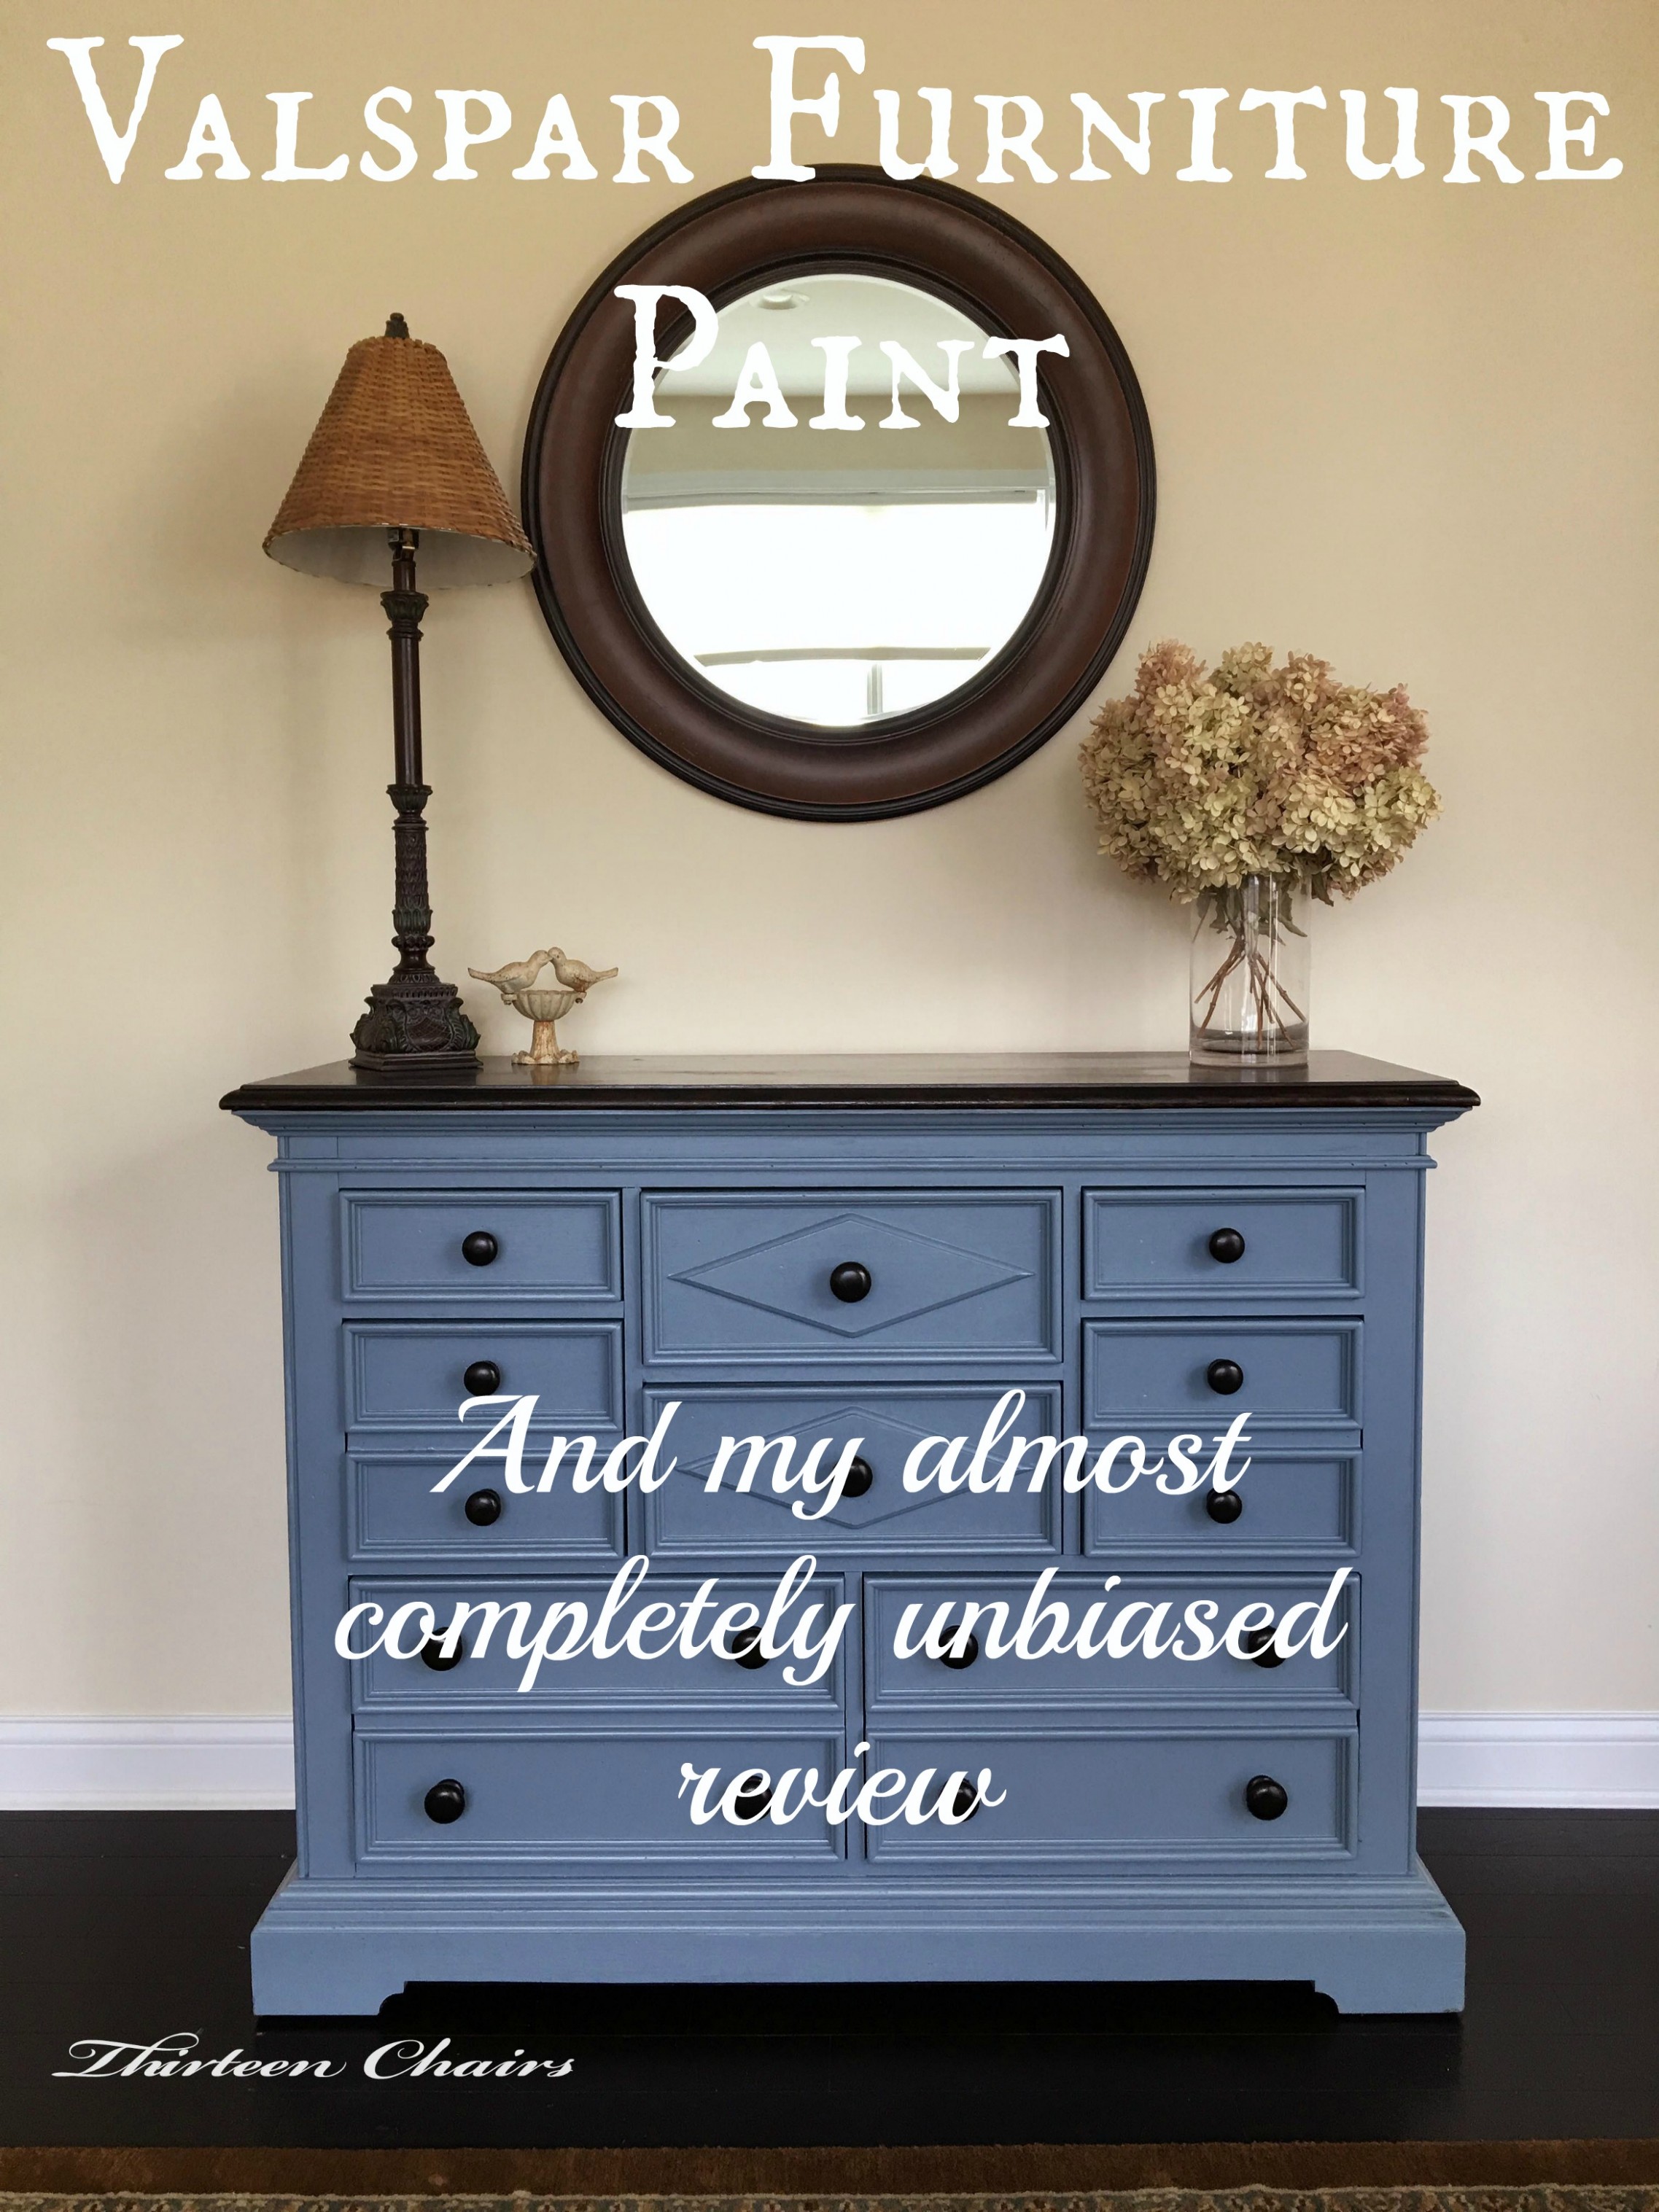 Painting With Valspar Furniture Paint Where To Buy Annie Sloan Chalk Paint In Virginia Beach